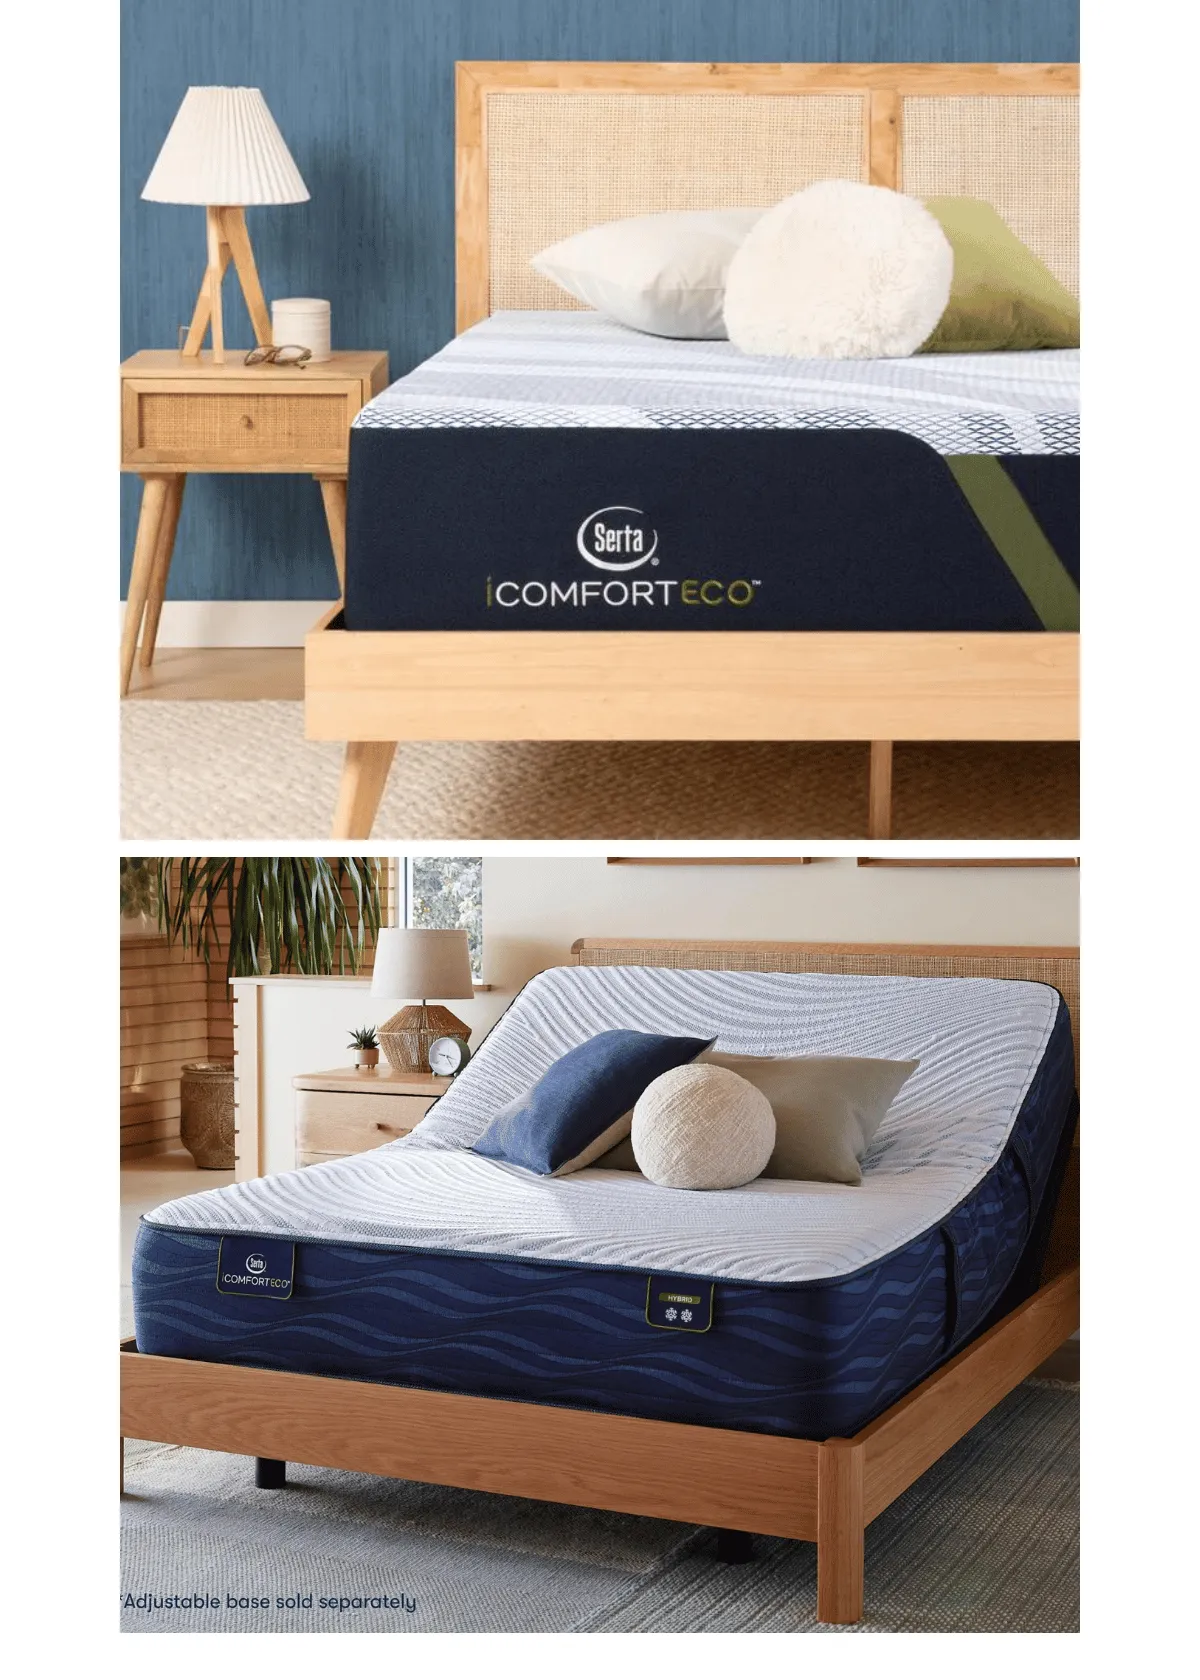 "Is the iComfort mattress the Best Choice for Hot Sleepers?"